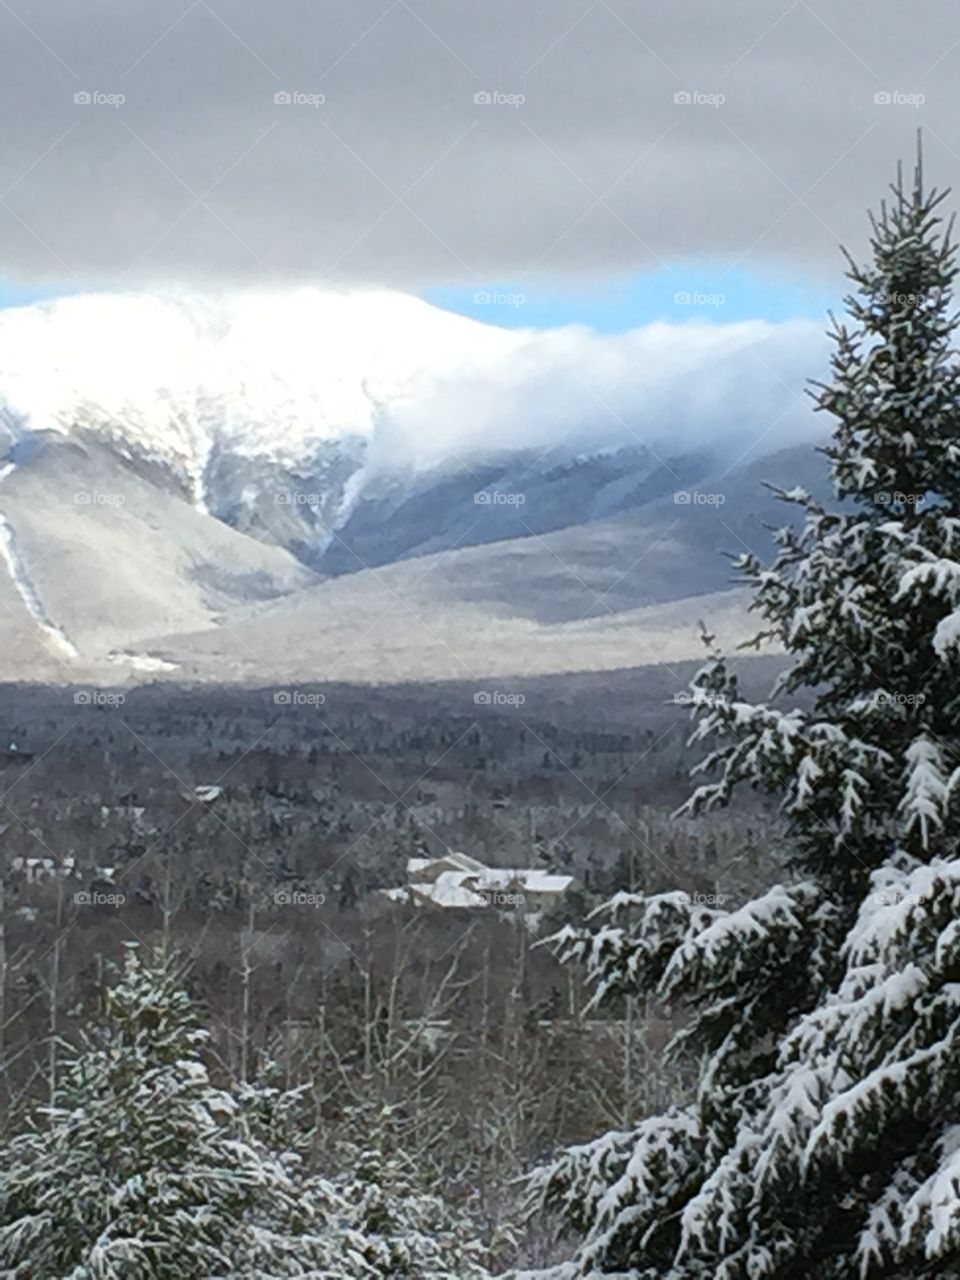 Majestic views of the snow capped mountains and stunning sky in The white mountains of New Hampshire. 